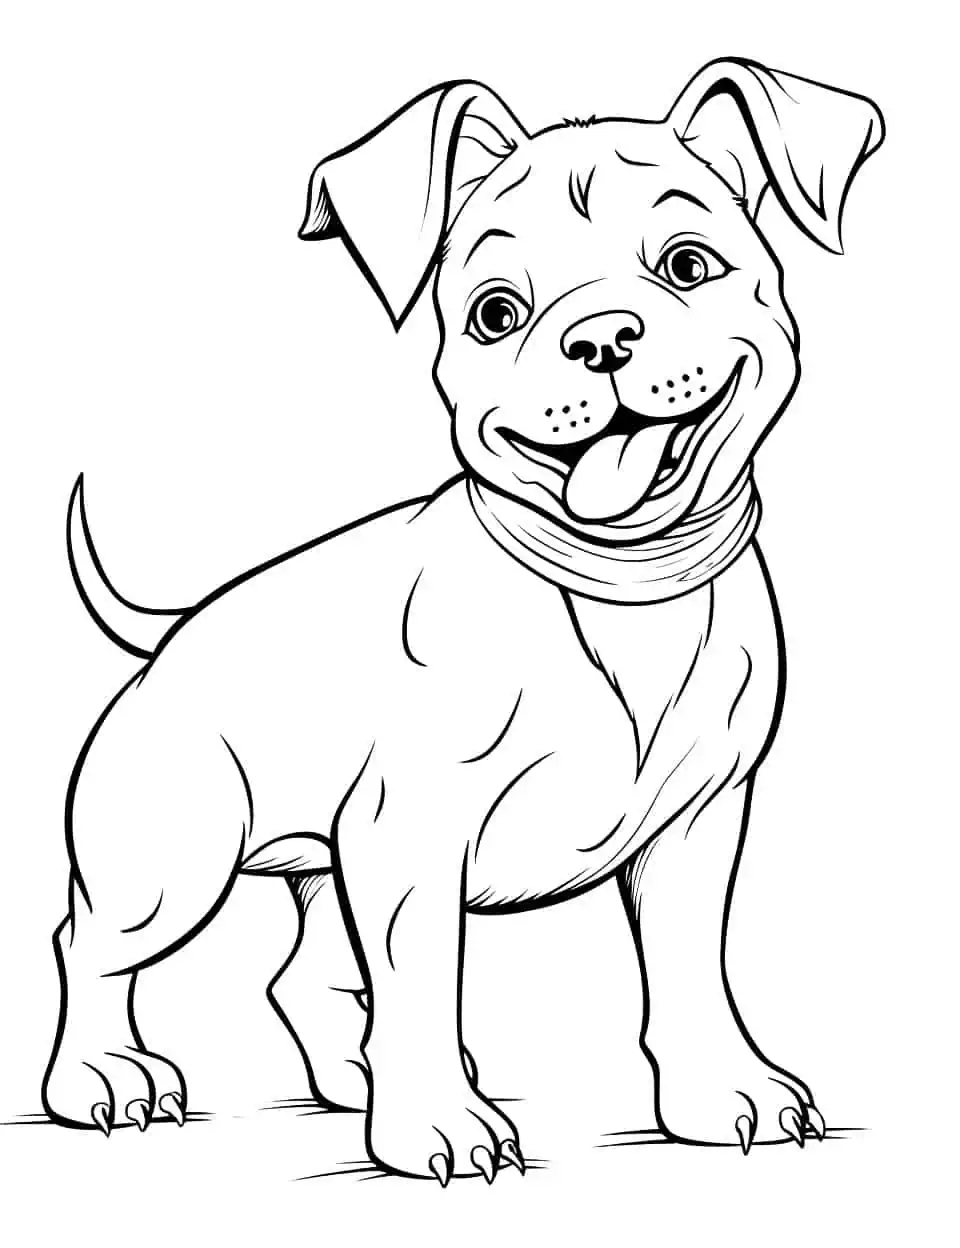 Friendly Pitbull Dog Coloring Page - An image of a friendly Pitbull wagging its tail.